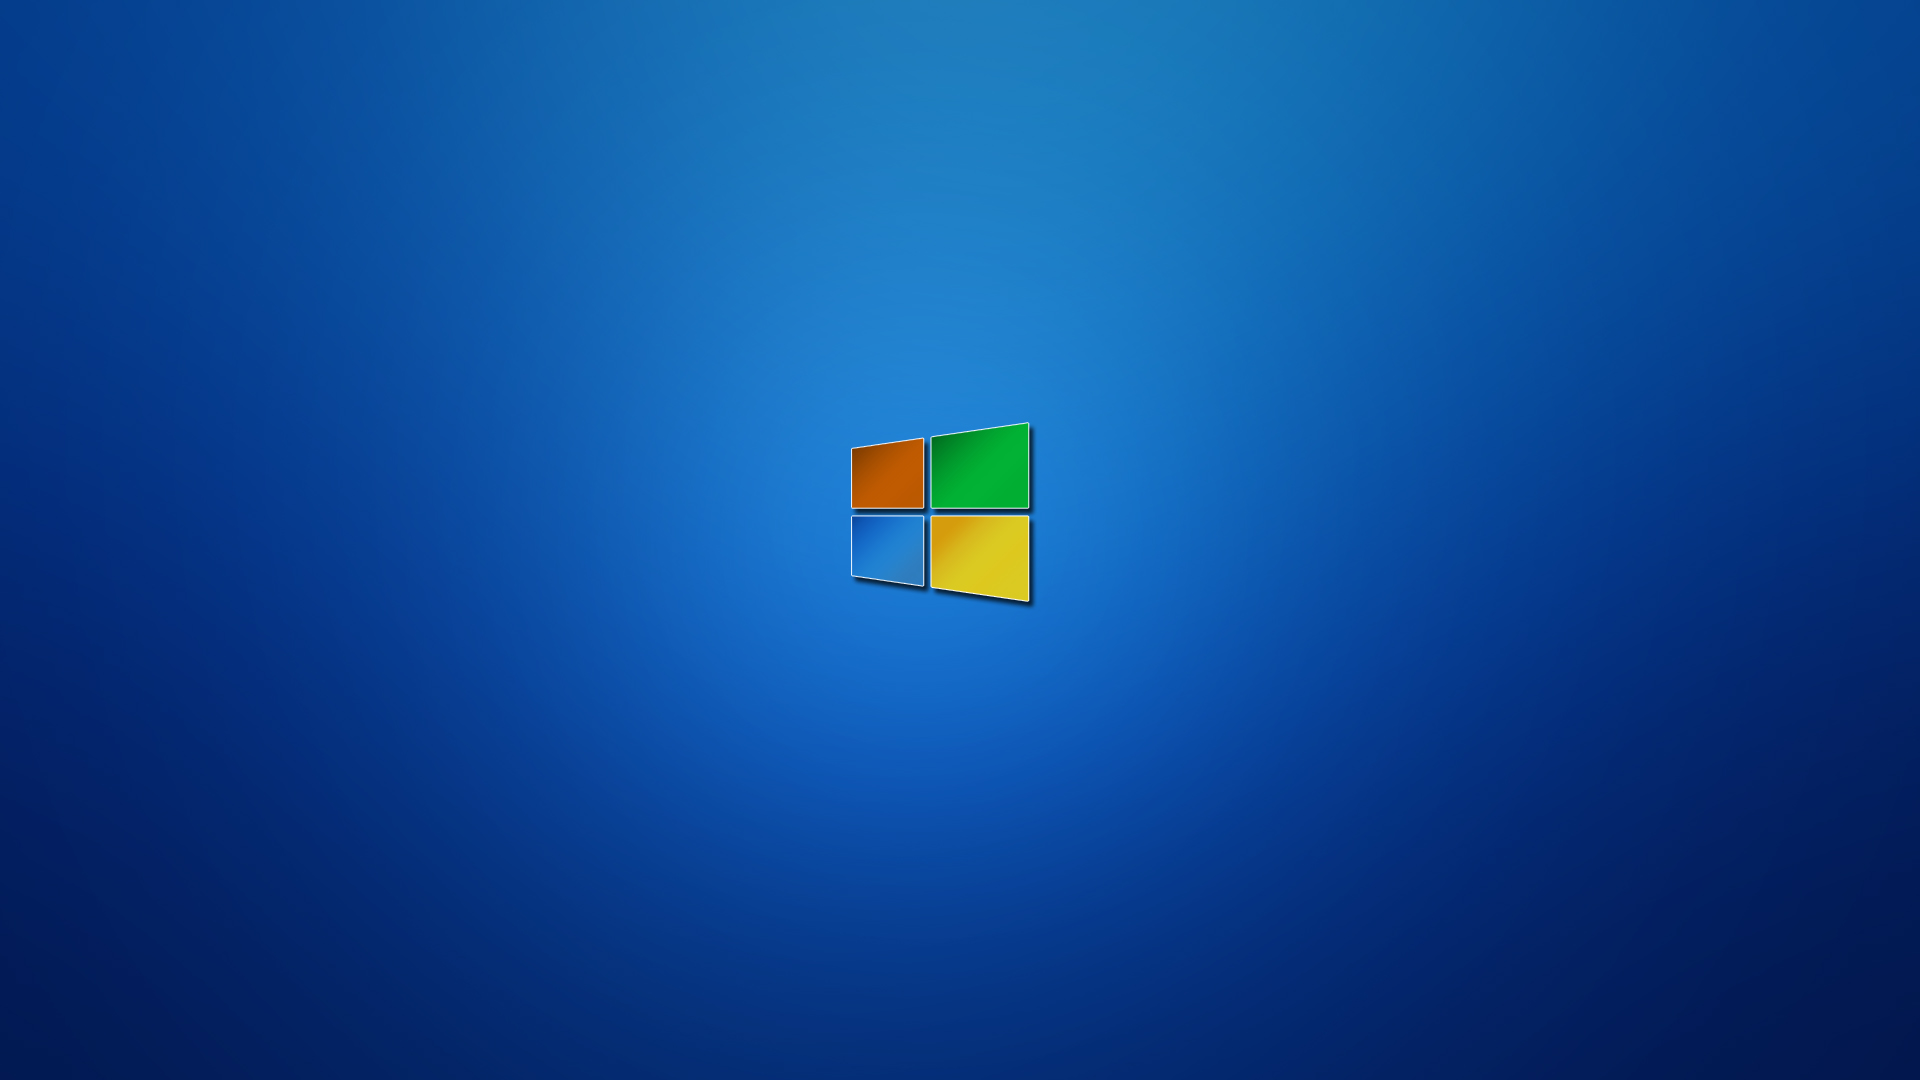 55 Windows 8 Wallpapers in HD For Free Download